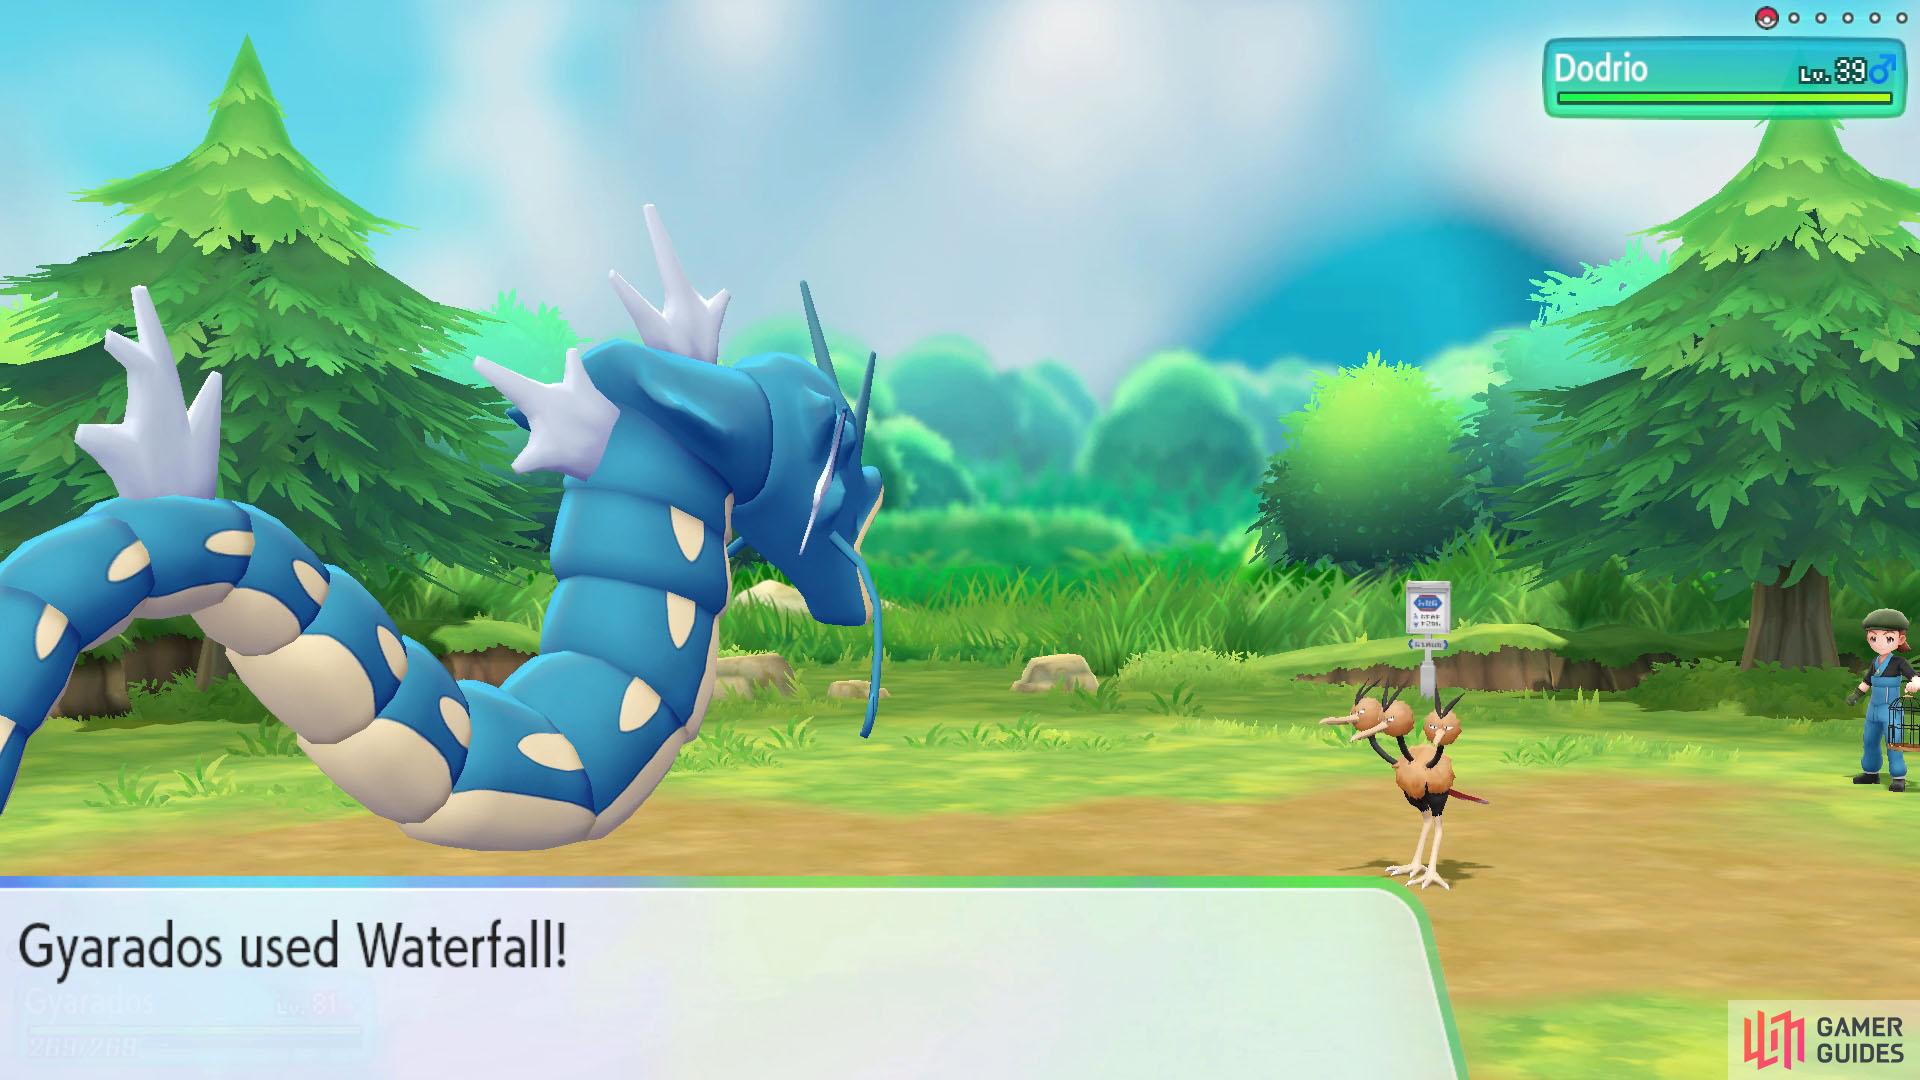 Gyarados gets STAB from Water-type moves. Sadly, it can’t learn any Flying-type moves.